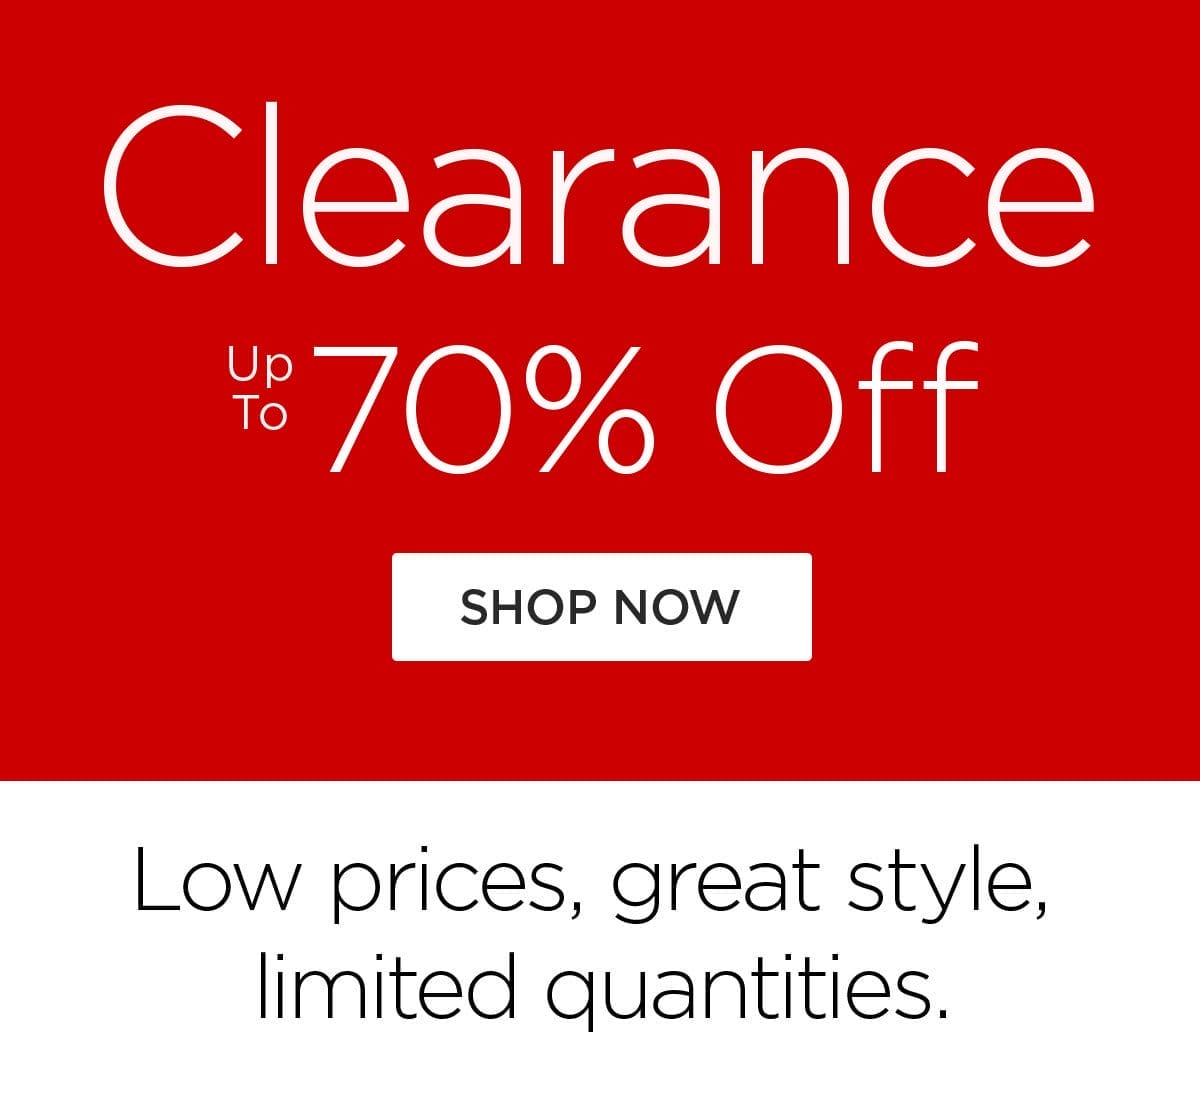 Clearance - Up to 70% Off - Shop Now - Low prices, great style, limited quantities.